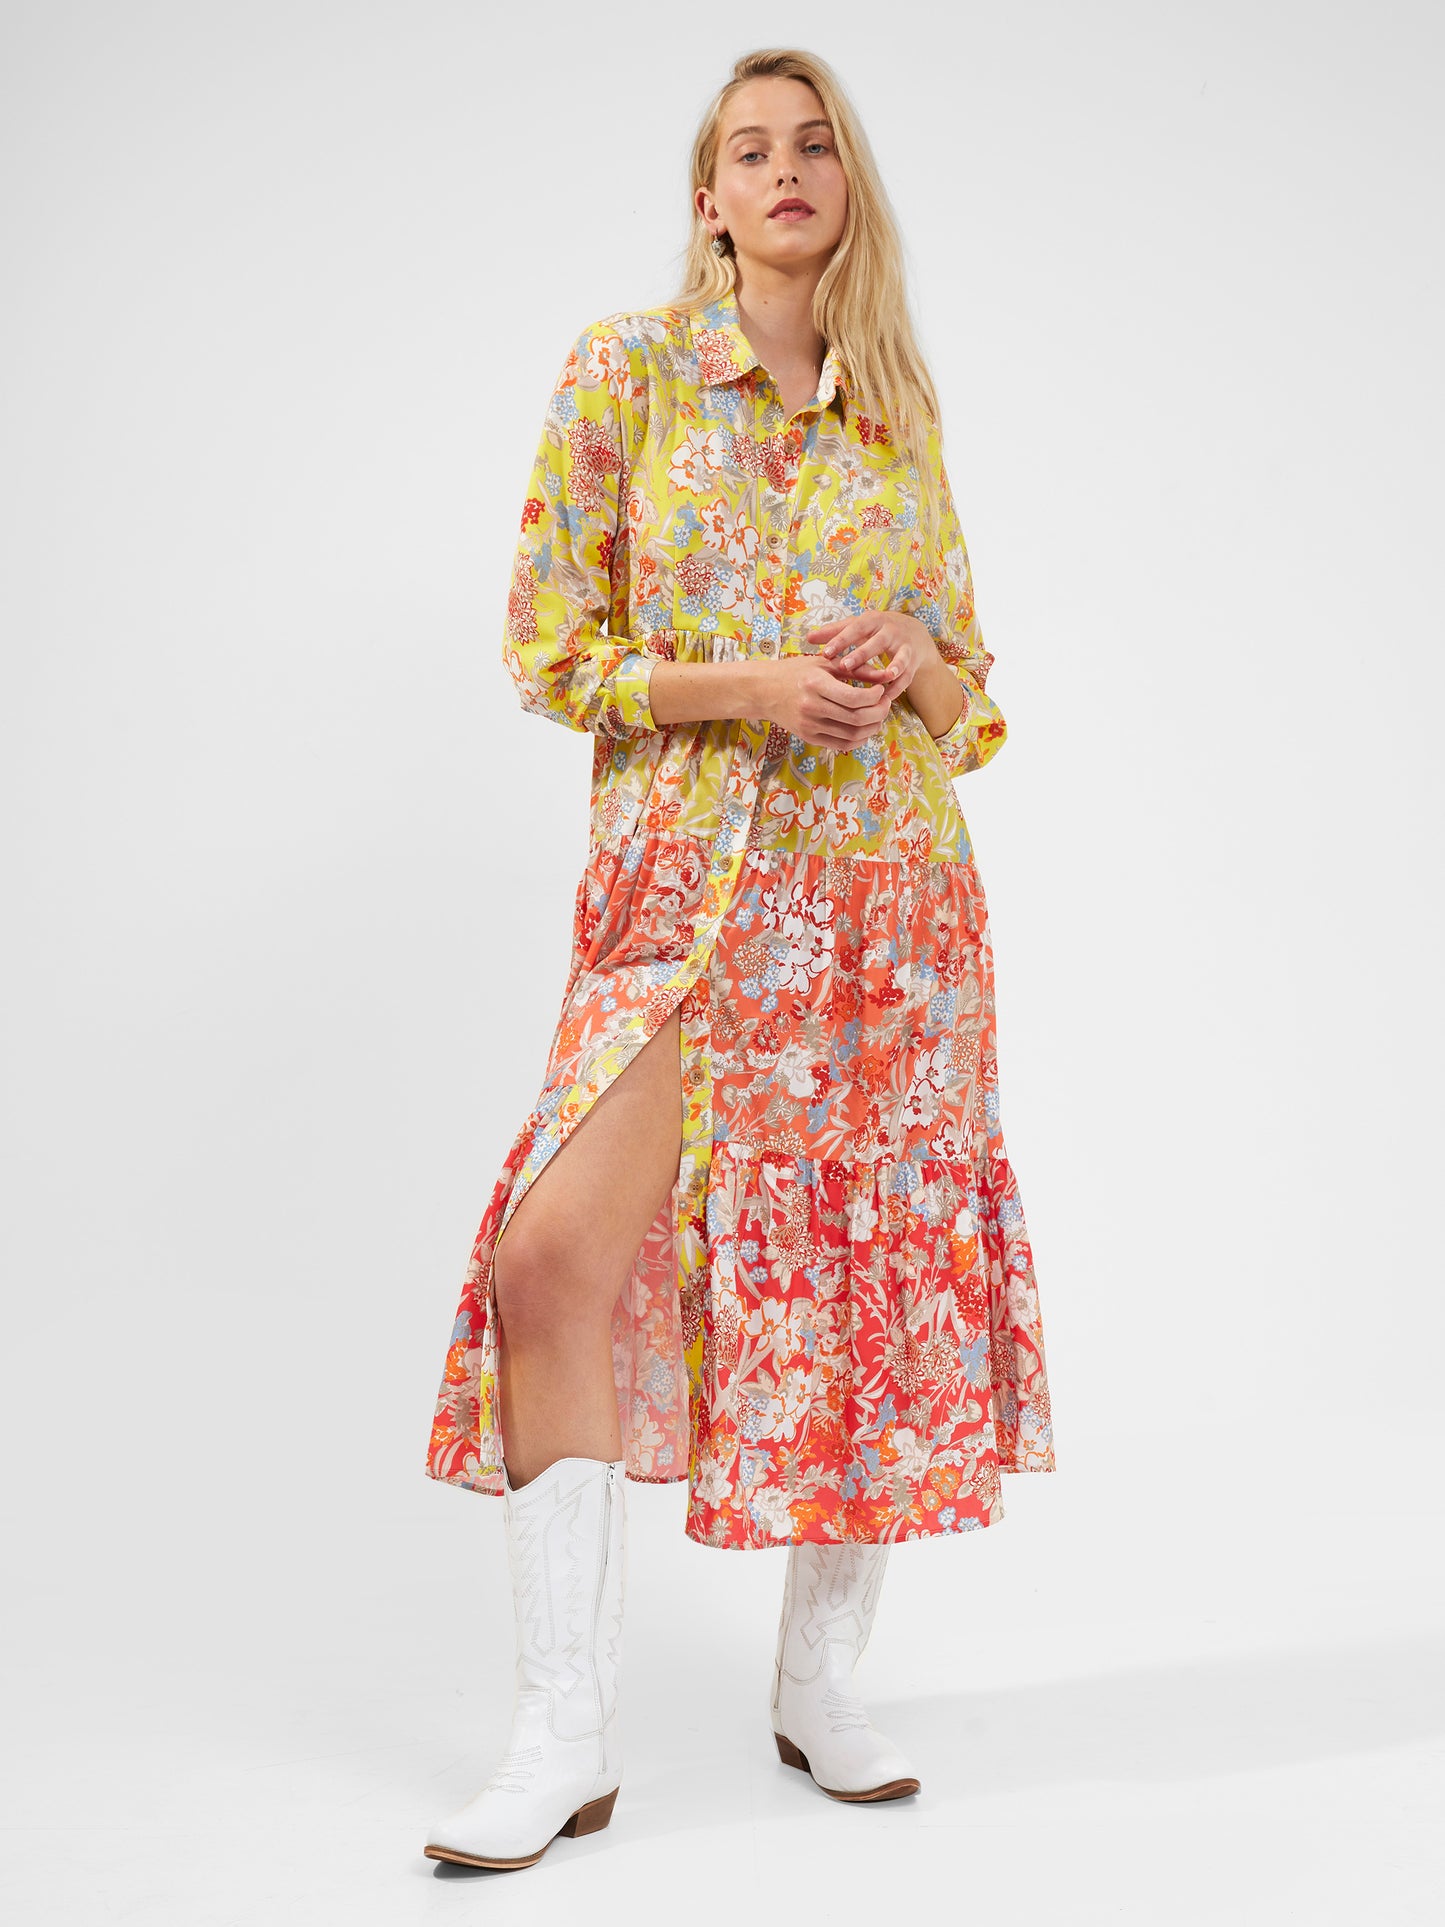 BLOSSOM COURTNEY TIERED BUTTON FRONT DRESS - FRENCH CONNECTION